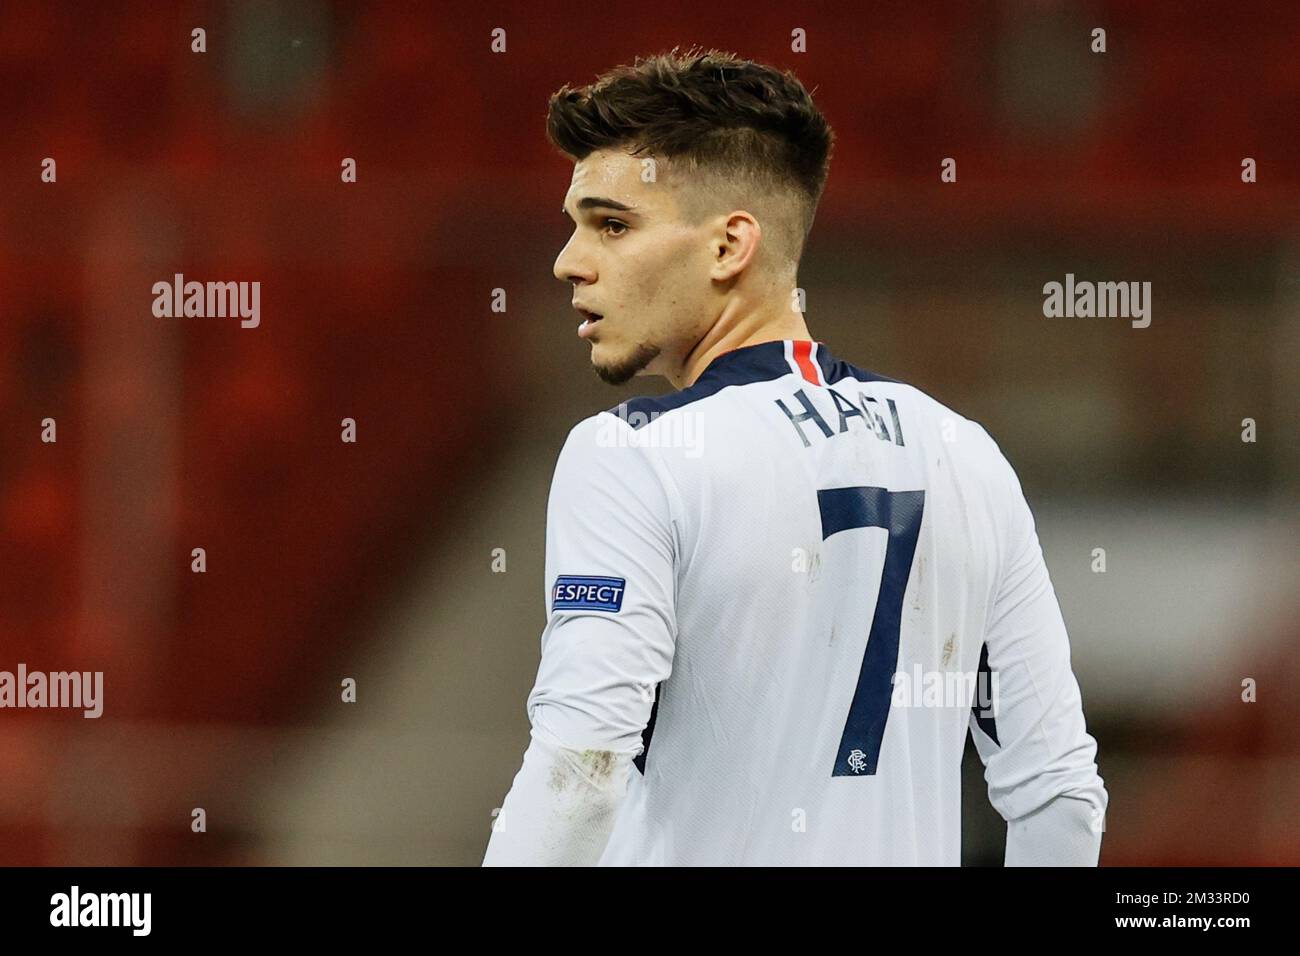 Rangers' Ianis Hagi pictured during a soccer match between Belgian team Standard de Liege and Scottish club Rangers FC, Thursday 22 October 2020 in Liege, on the first day of the group phase (group D) of the UEFA Europa League competition. BELGA PHOTO BRUNO FAHY Stock Photo